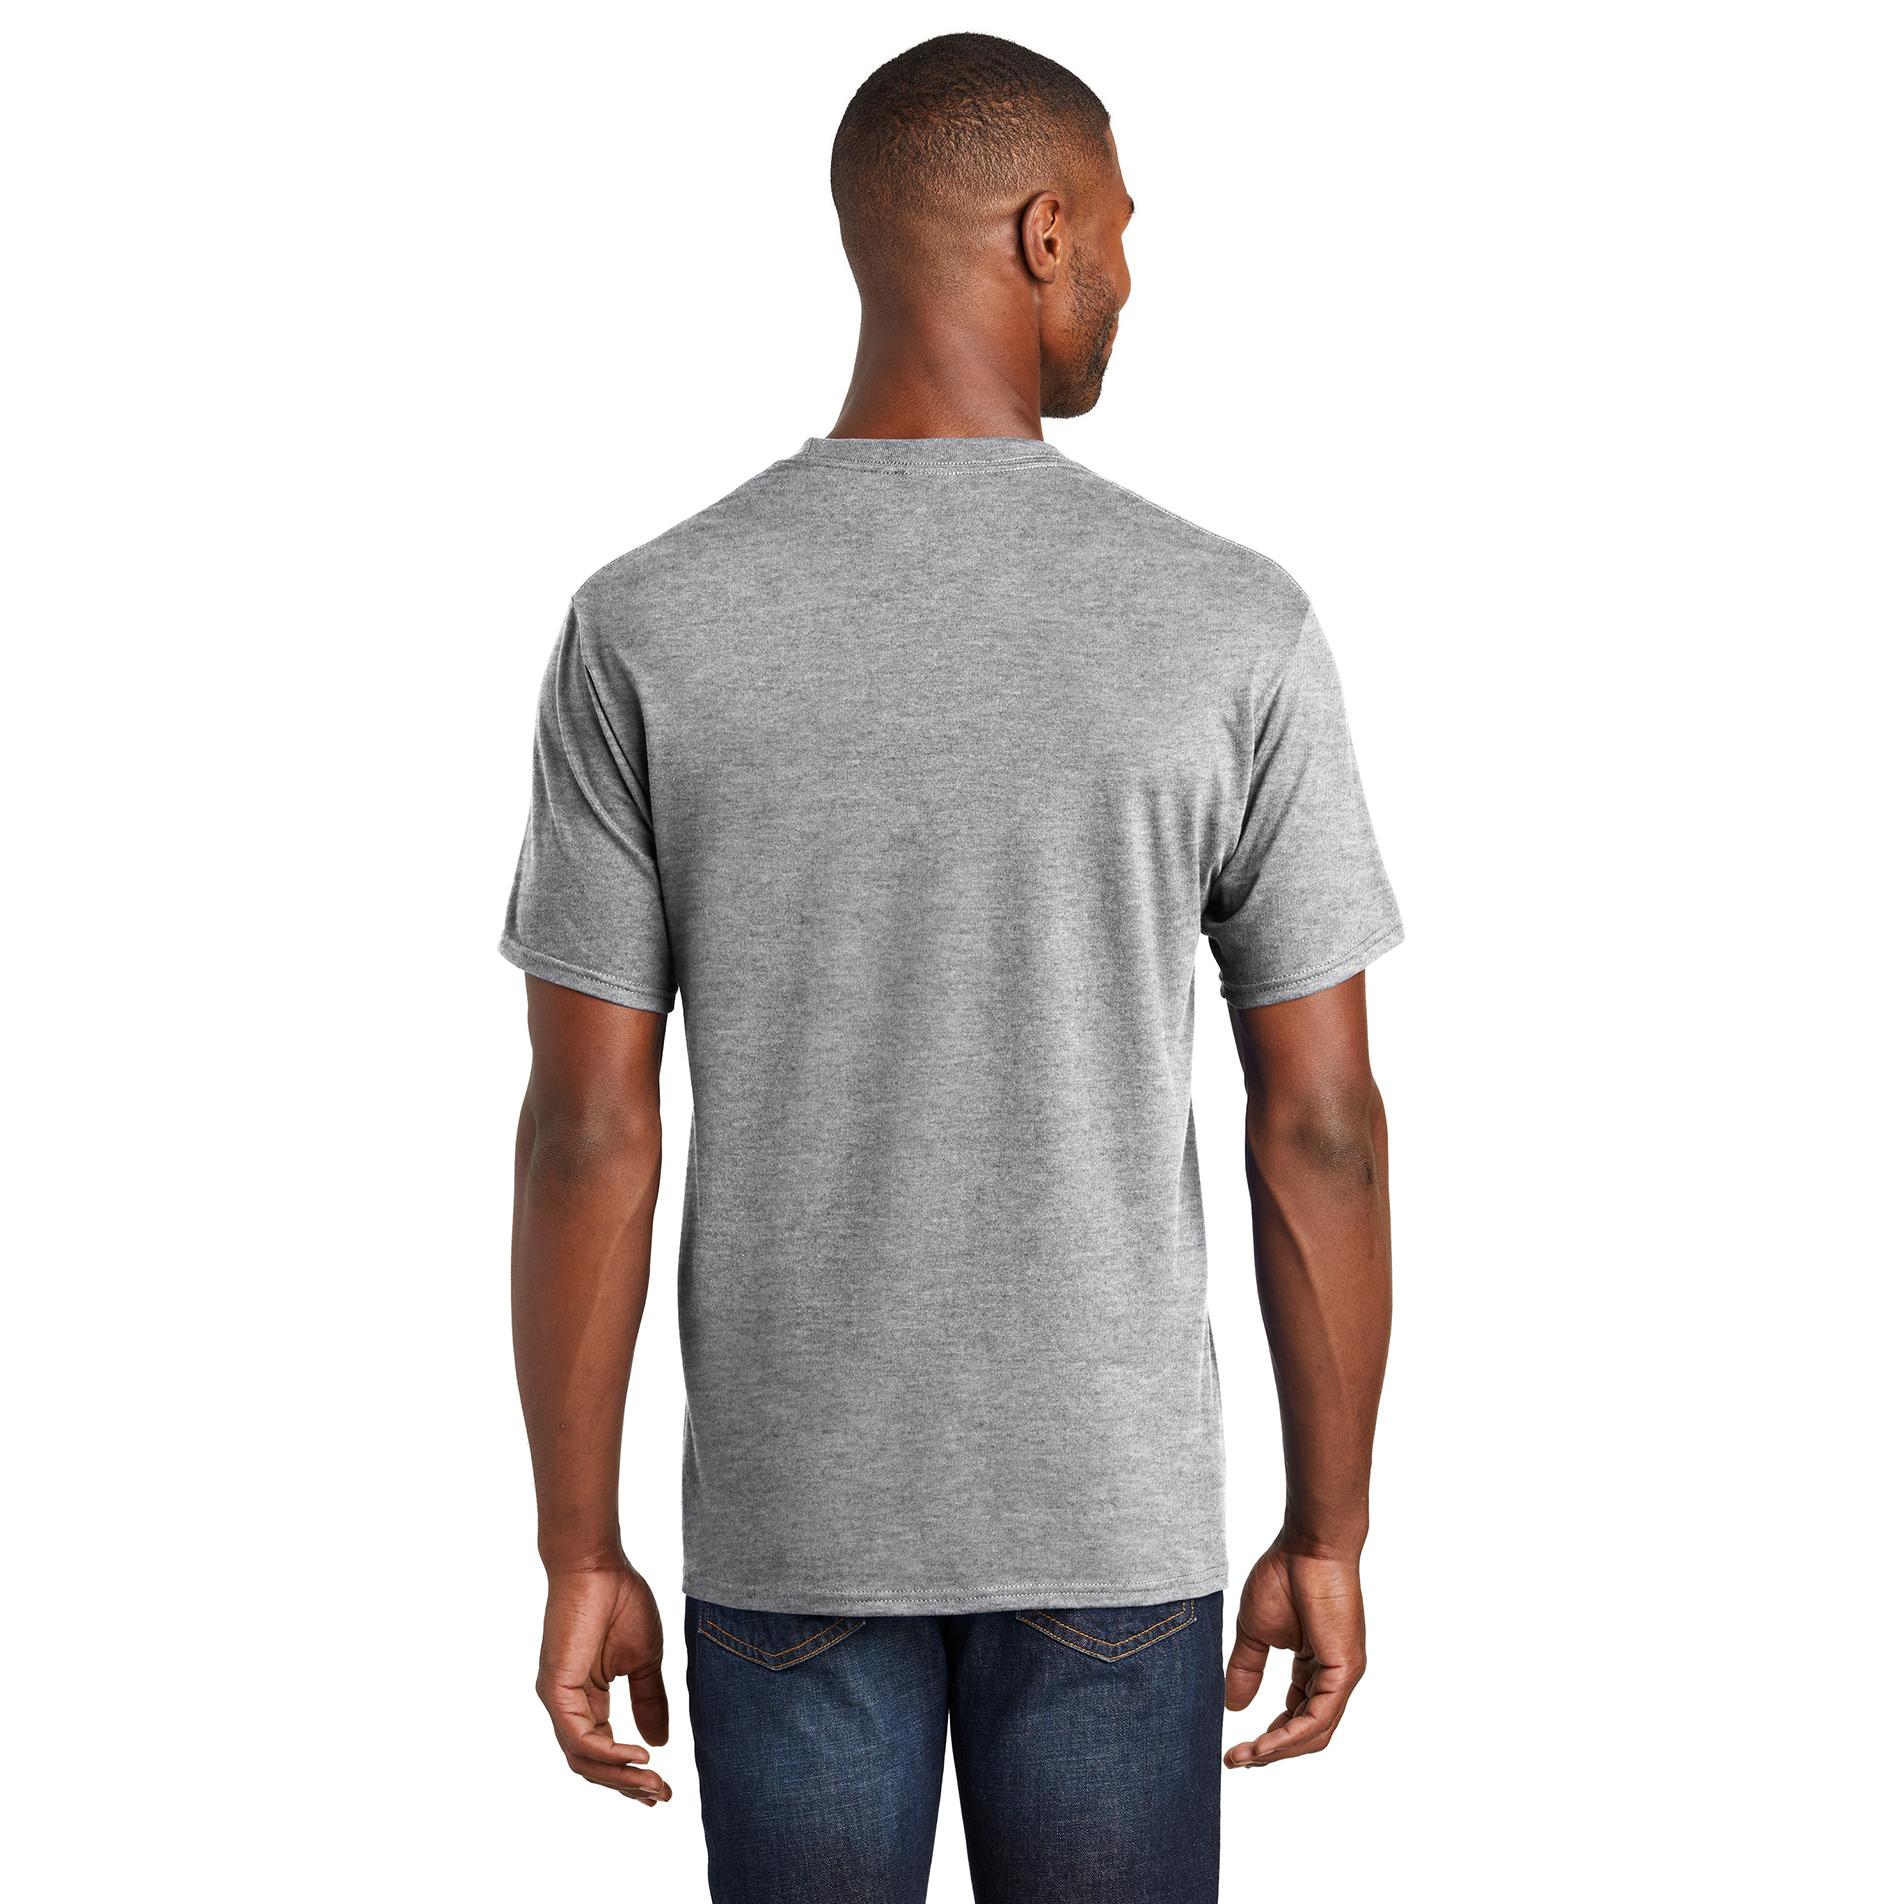 Fan Full Tee Company - PC450 Favorite Port Heather Source | & Athletic